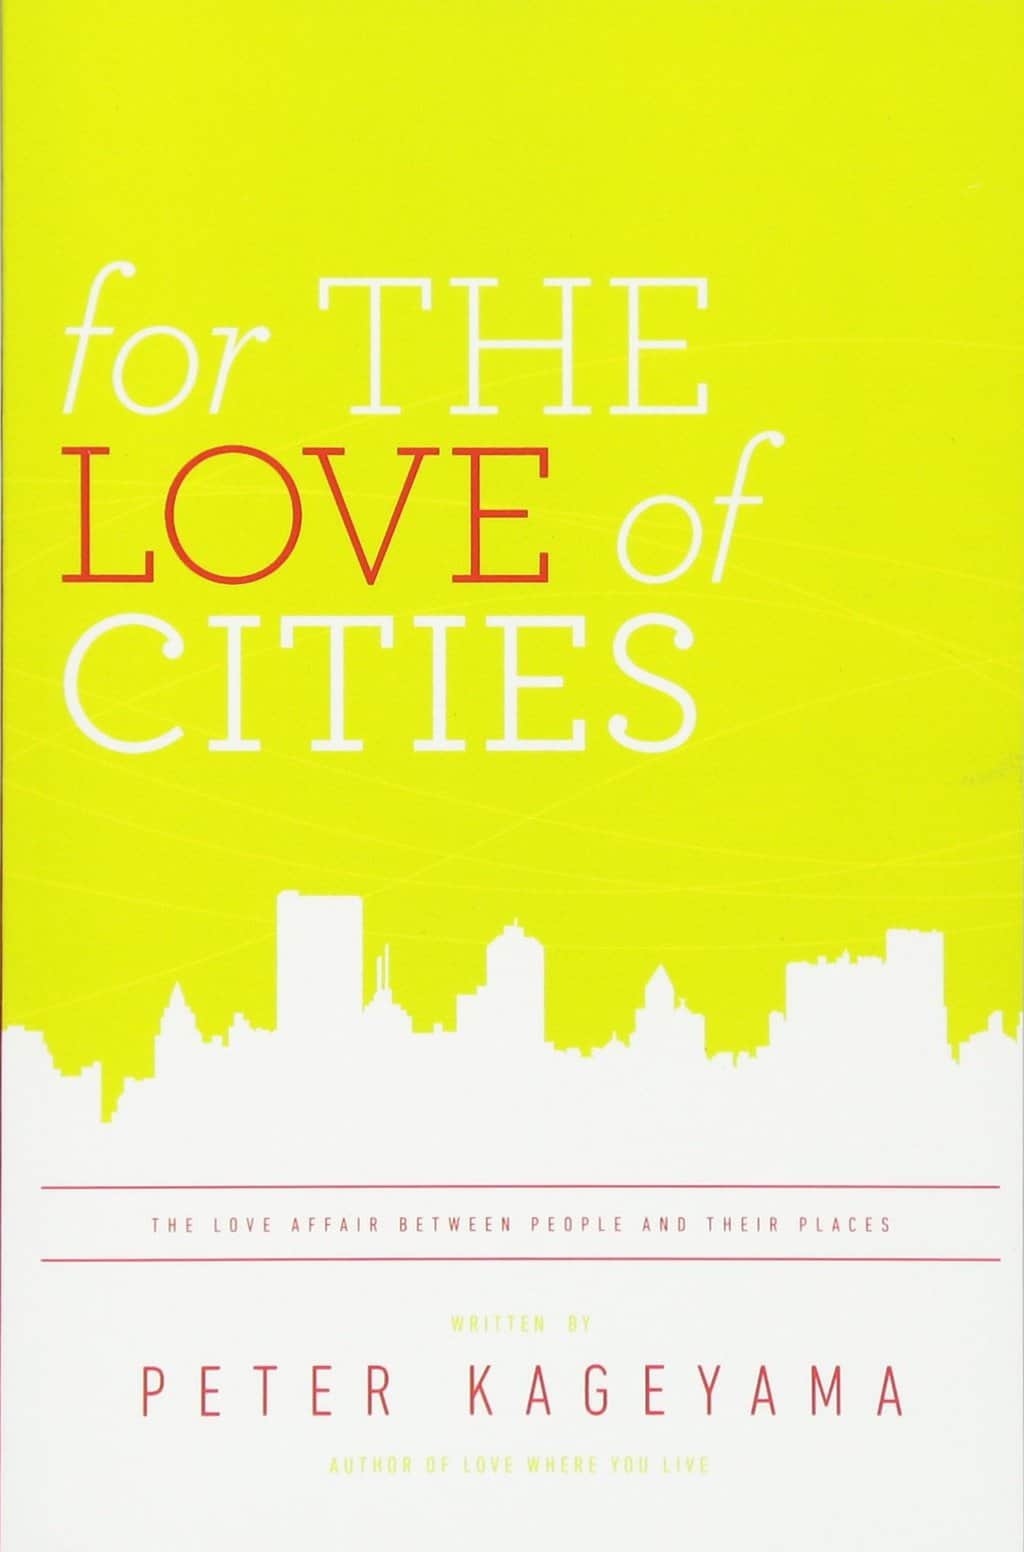 For the Love of Cities, The Love Affair Between People and Their Places by Peter Kageyama